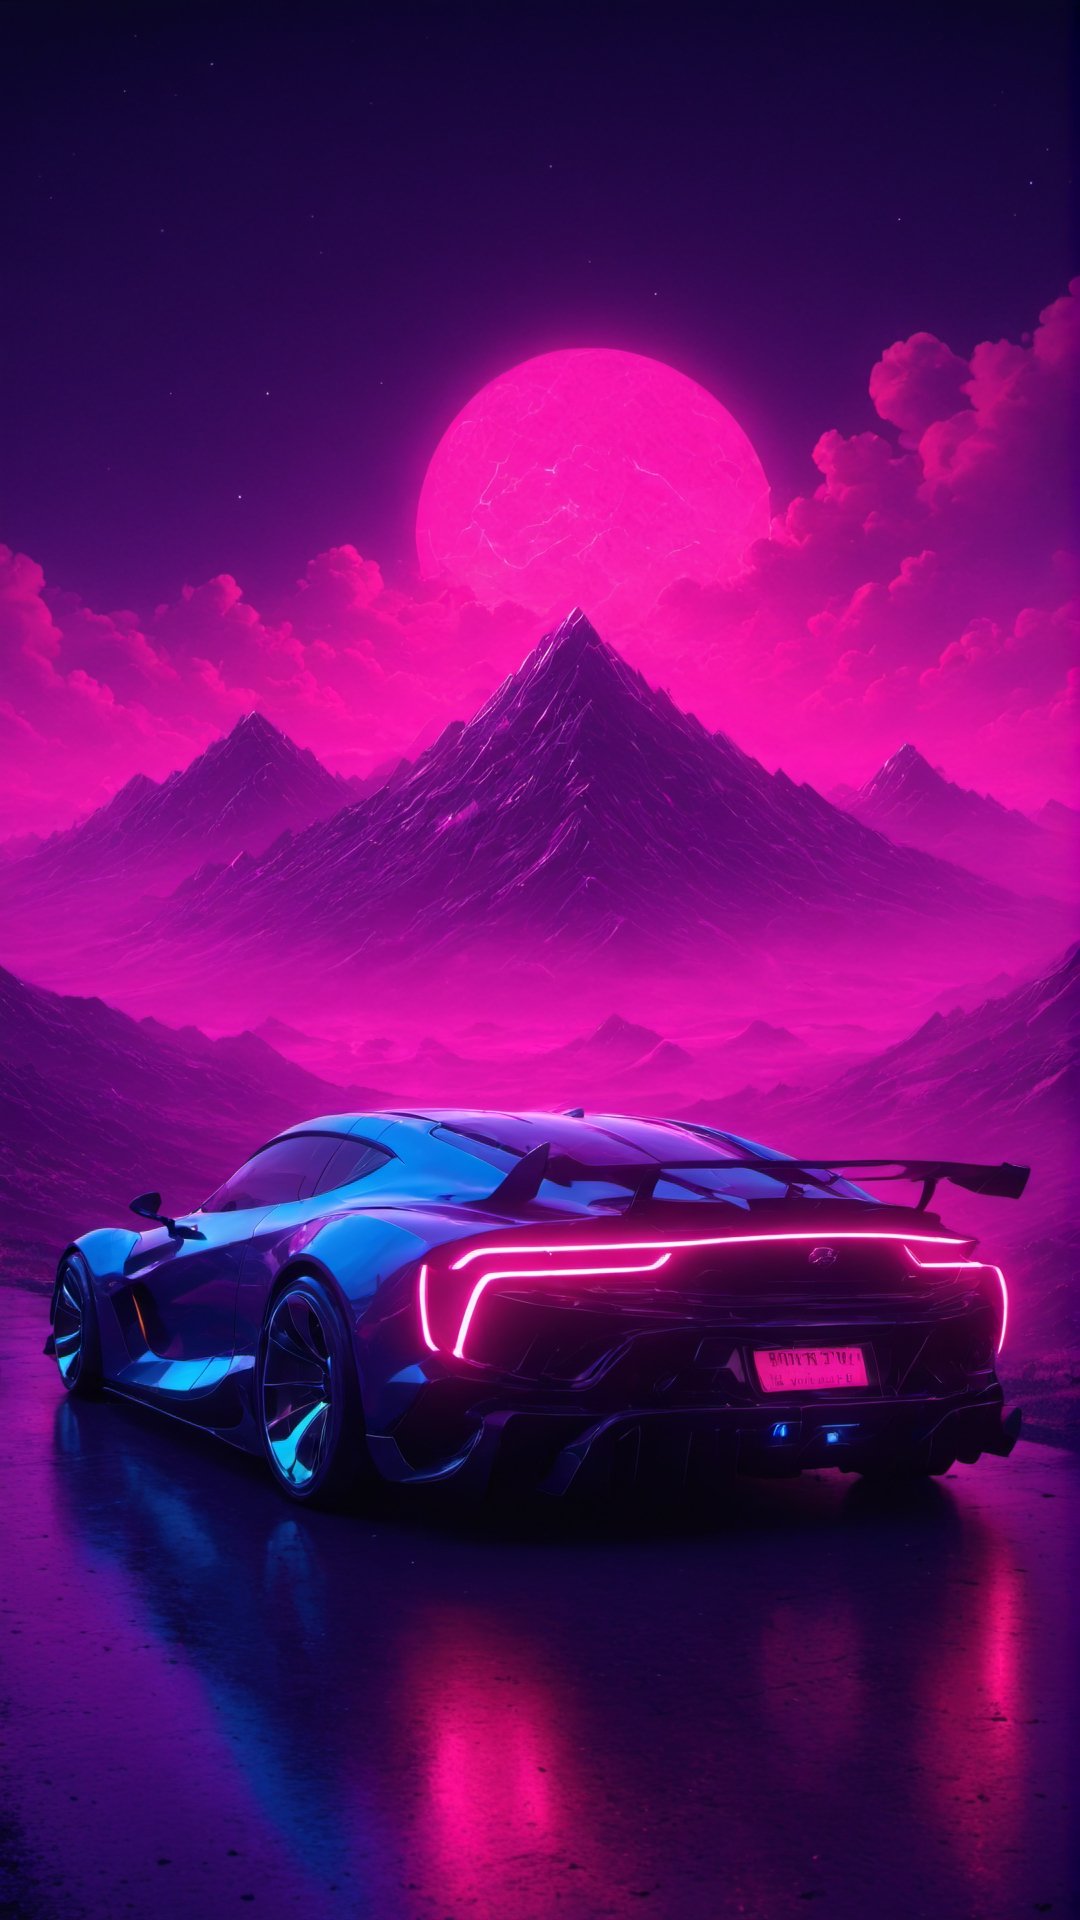 futuristic sports car, neon color, night sky, colorful beautiful mountain, sharp,clouds, valley art, detailed tires,valley scene, neon photography style, more detail XL, ColorART,neon photography style